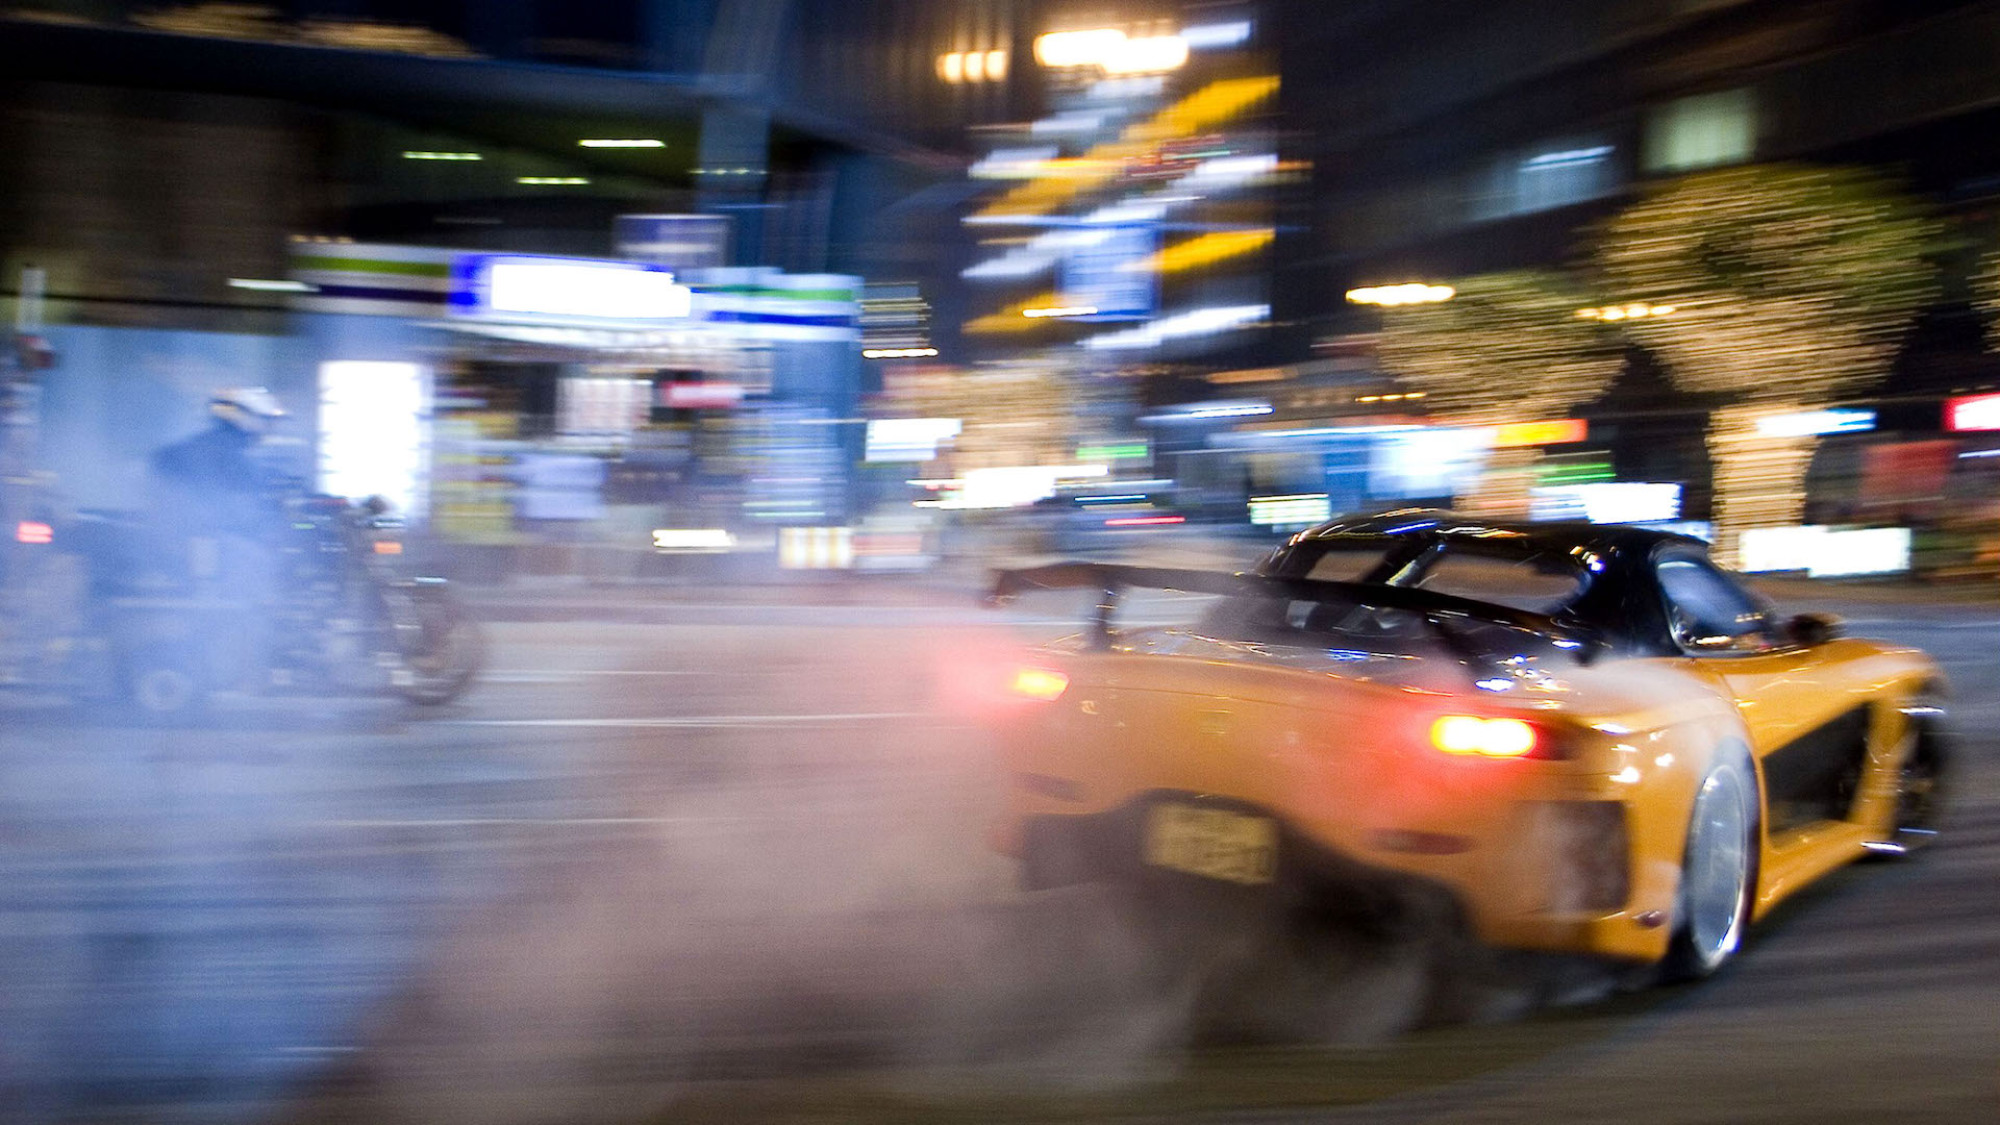 A still from "Tokyo Drift" showing a car drifting in the middle of the city.